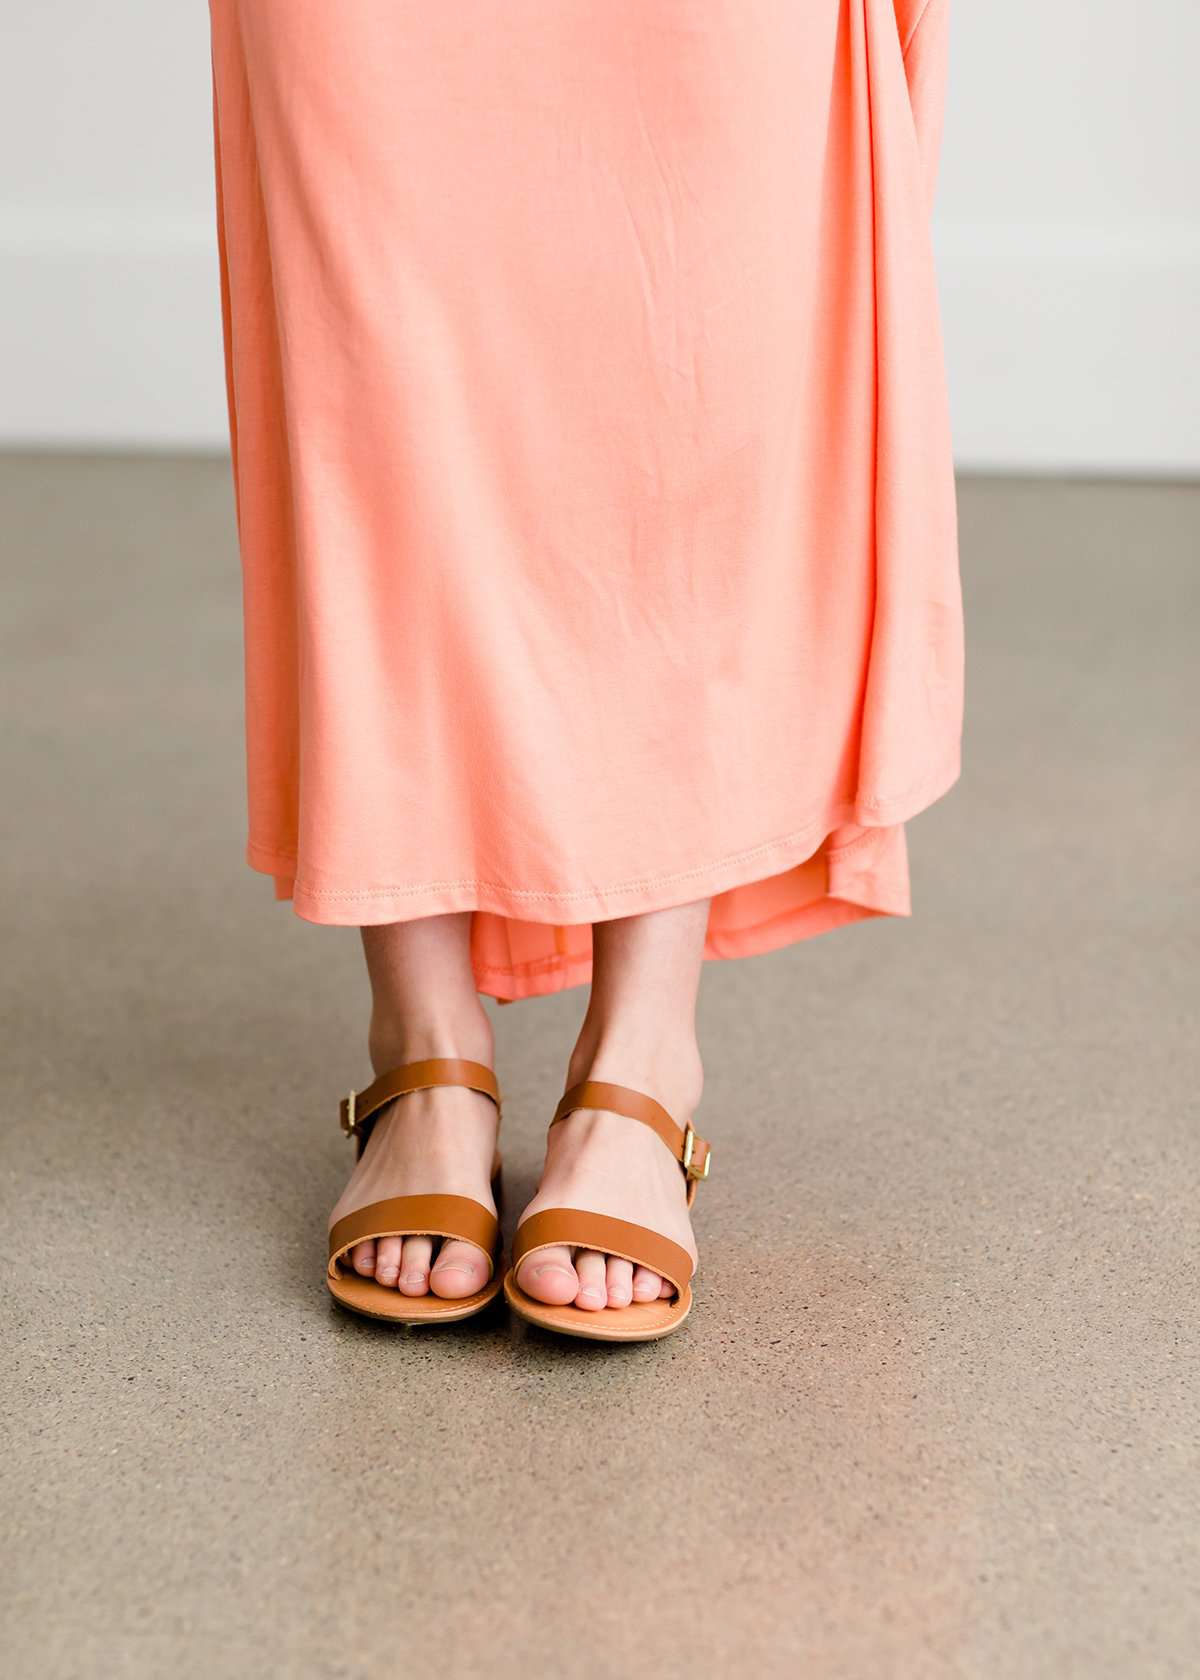 Girls ankle strap dress sandal in a tan color